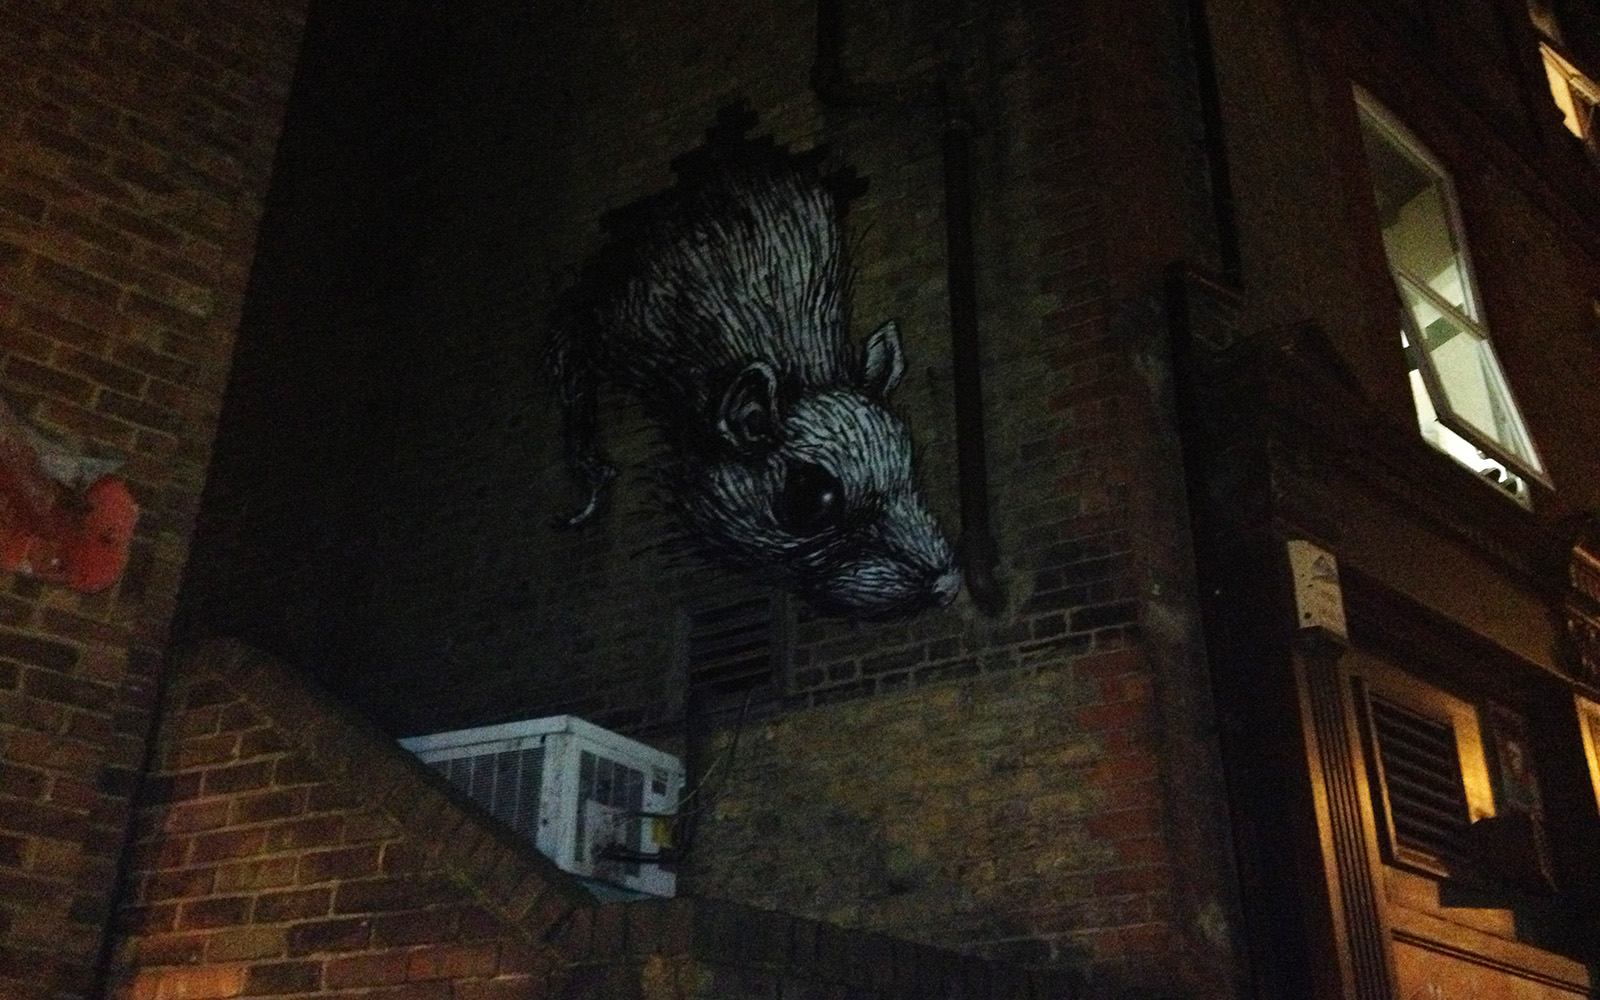 White Chapel, Jack The Ripper Tour, 7 October 2015